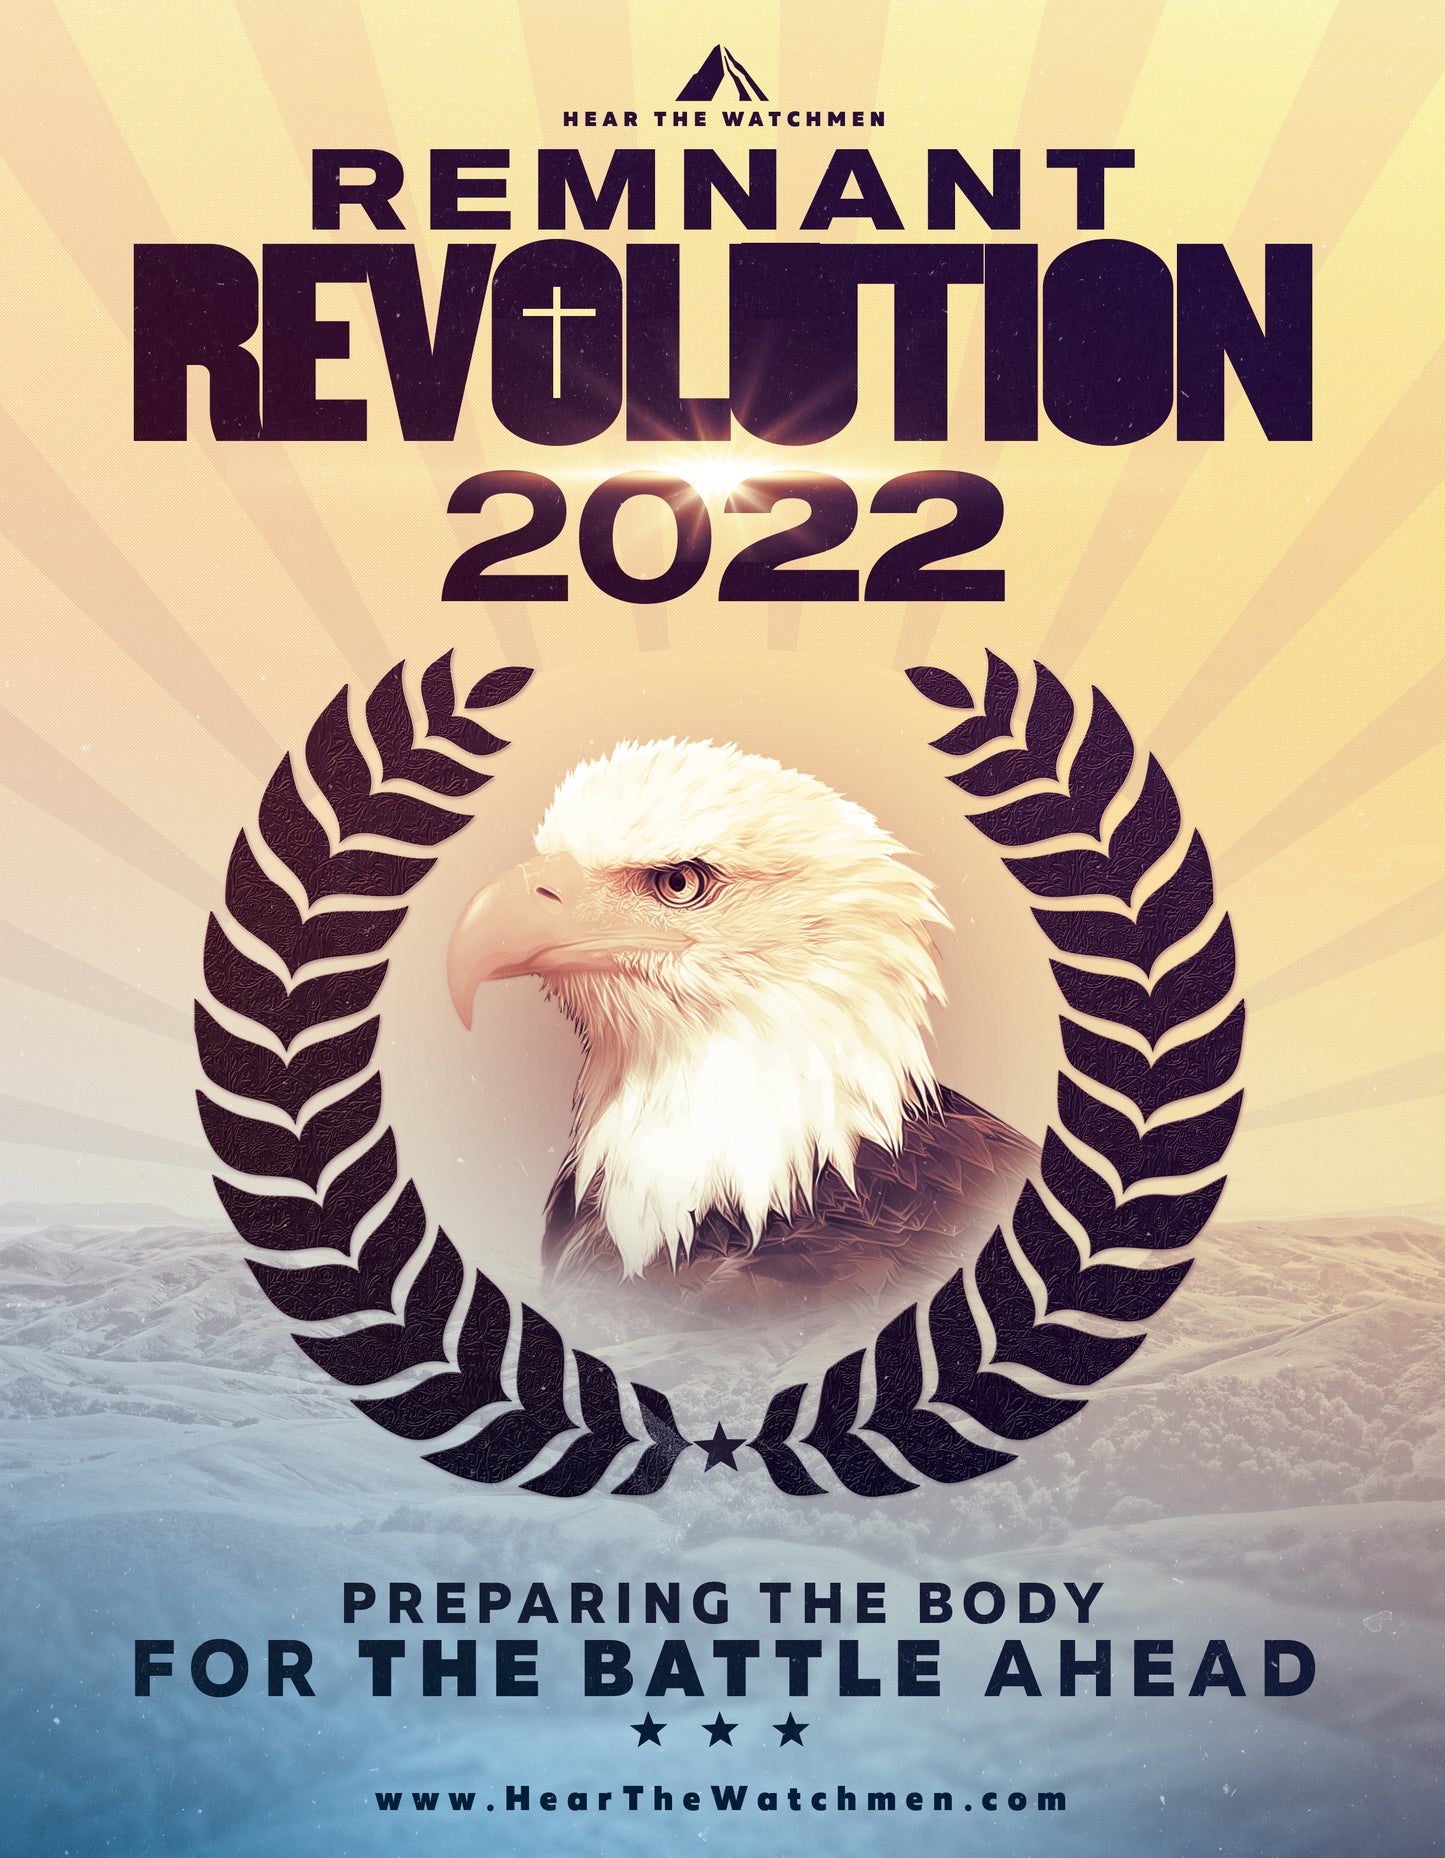 FEBRUARY 1ST 2022 "THE REMNANT REVOLUTION" ON-DEMAND GATHERING